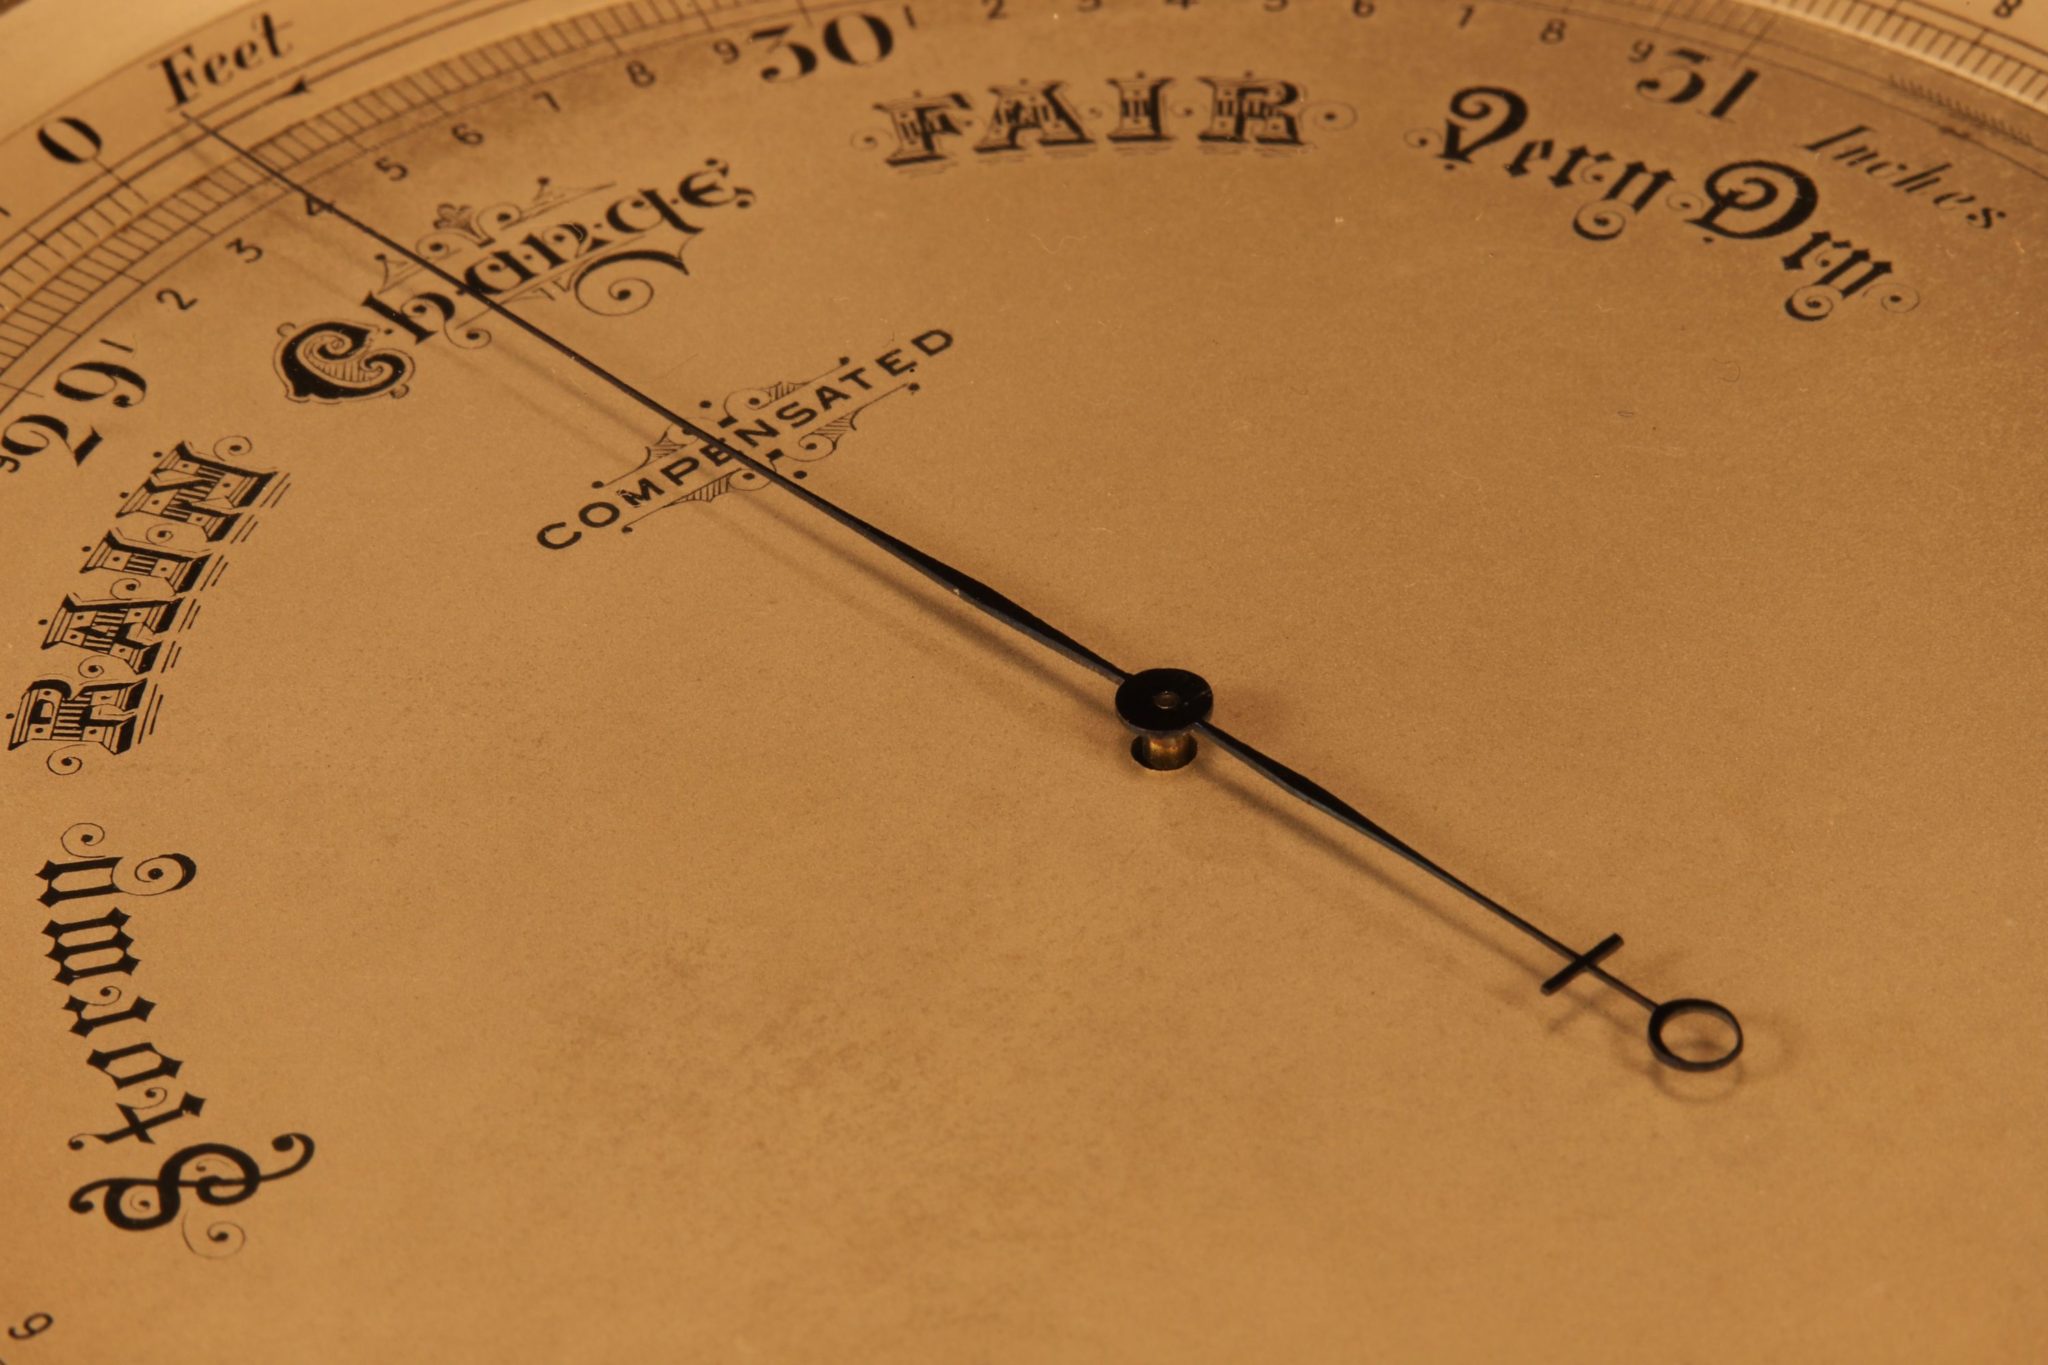 Image of Short & Mason Chart Table Barometer Retailed by Reynolds & Son